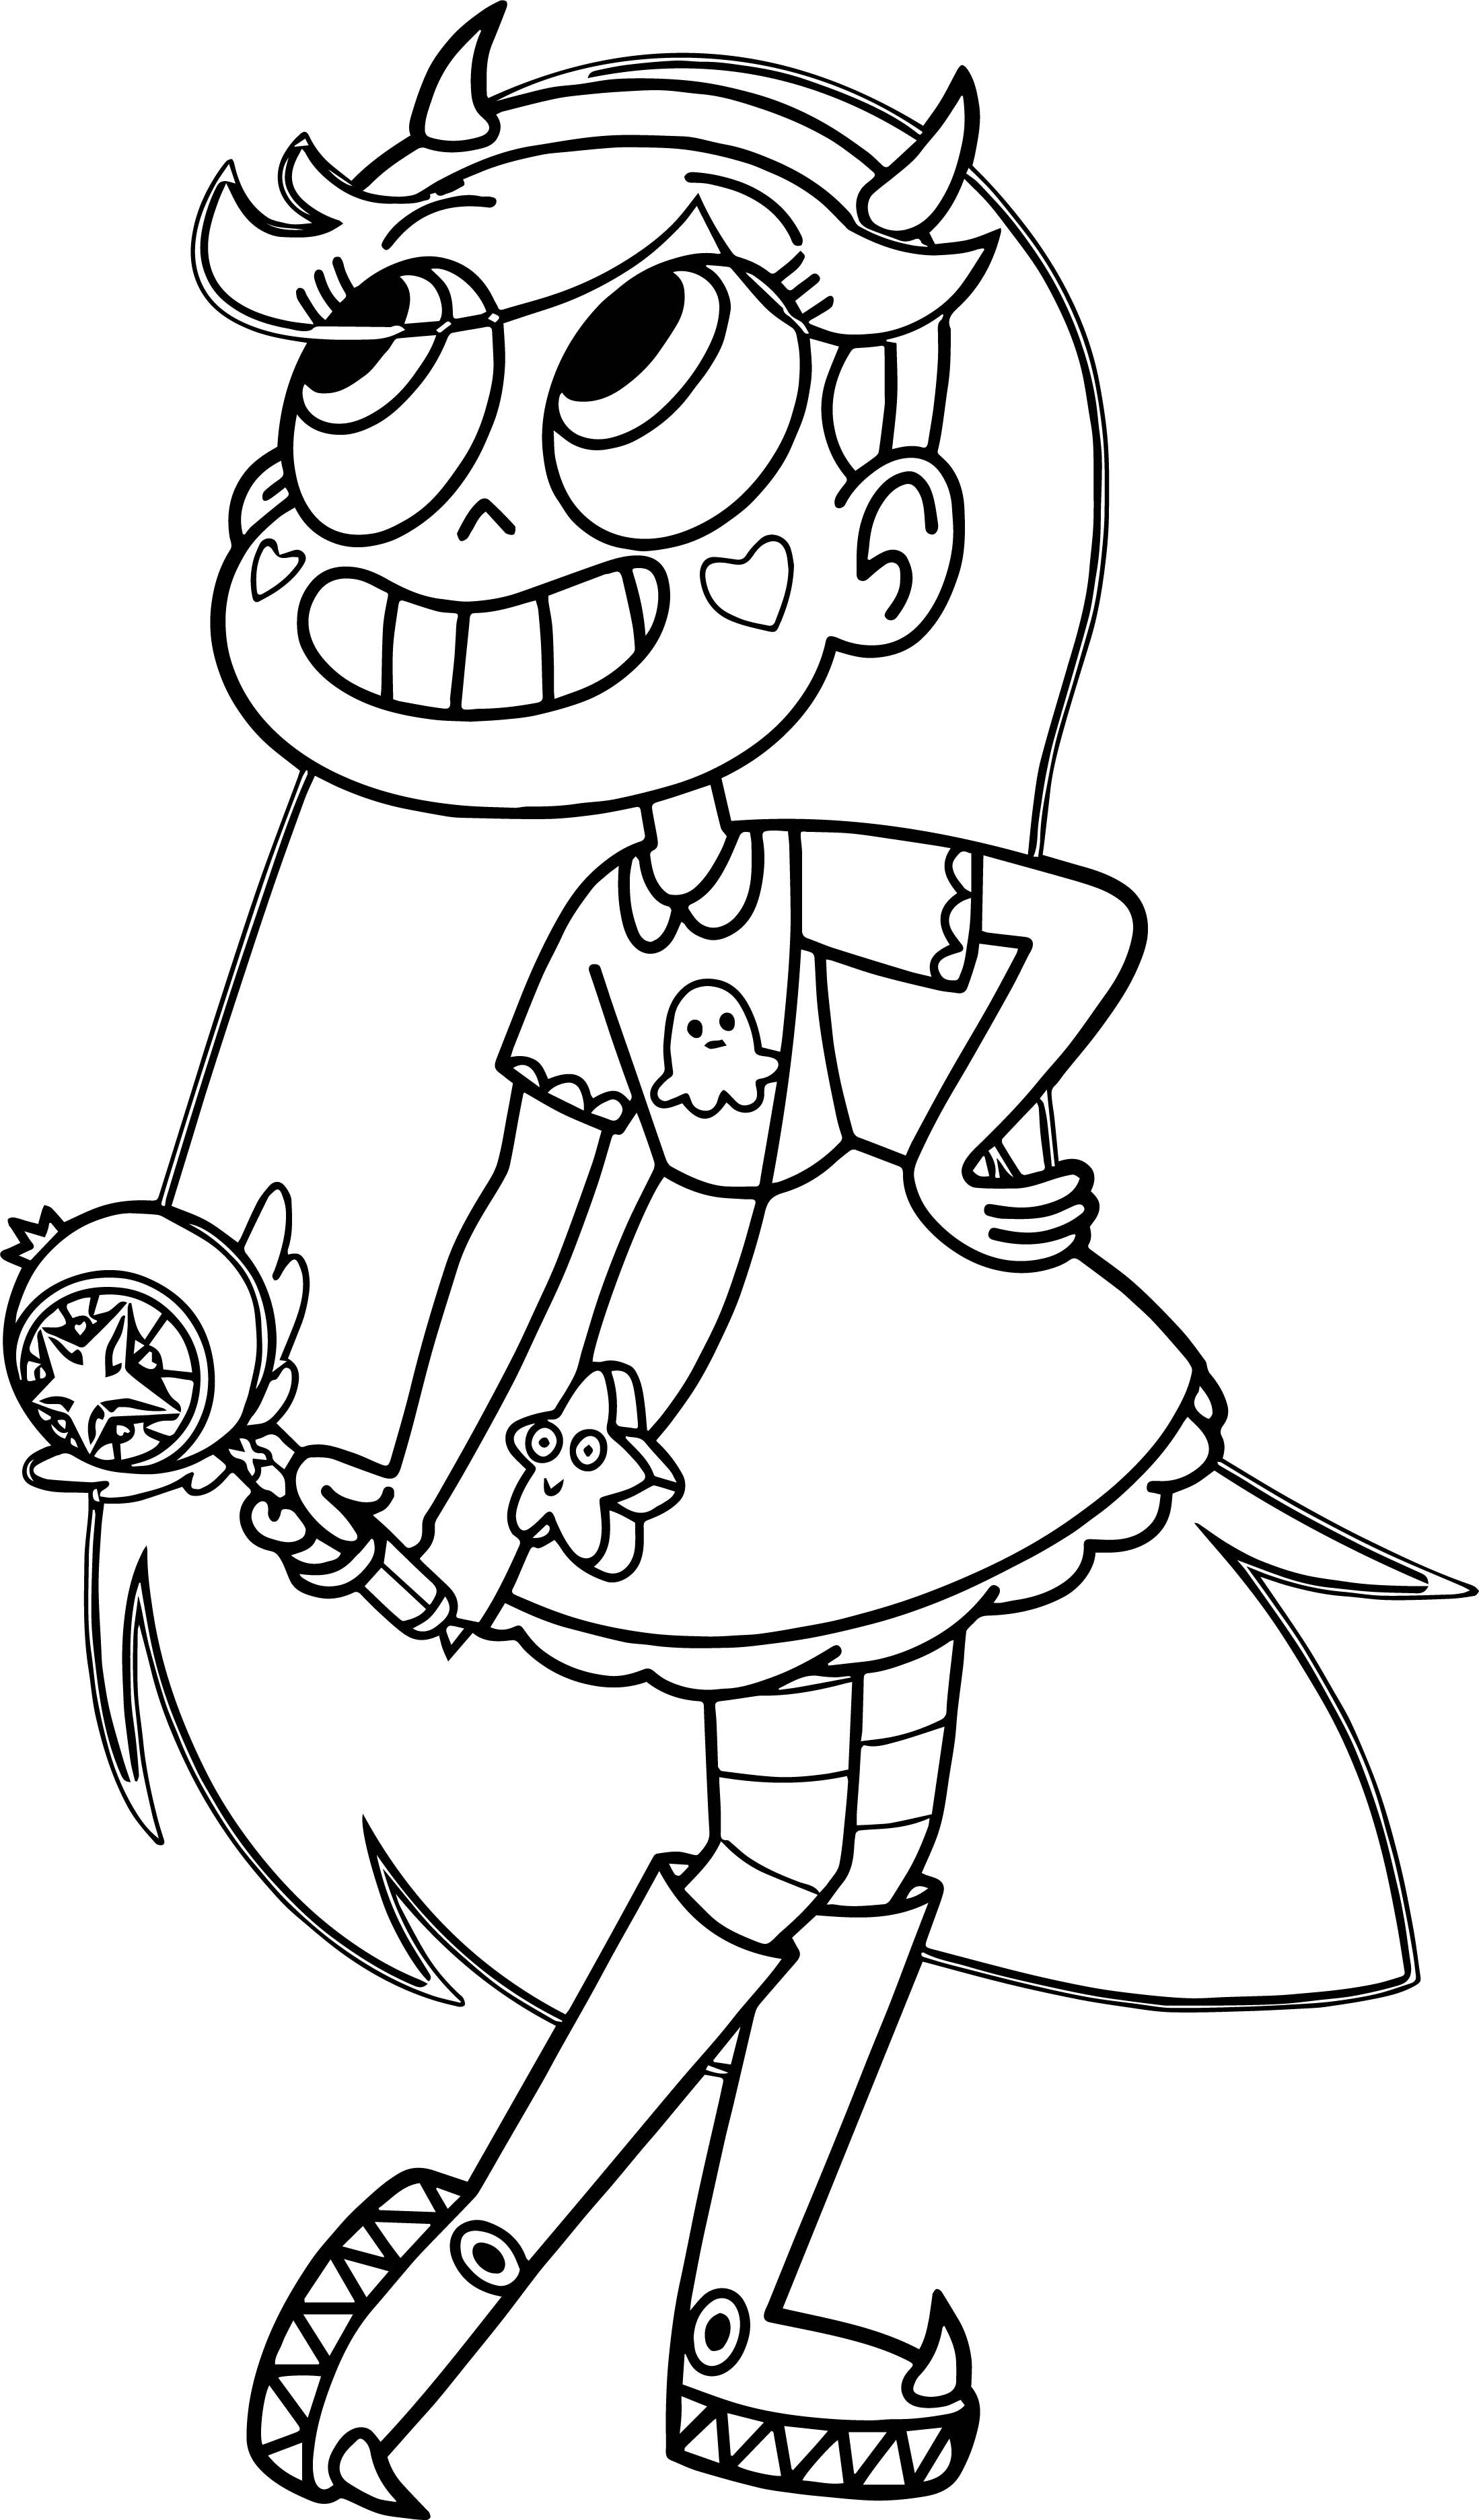 Star vs the forces of evil coloring pages   YouLoveIt.com